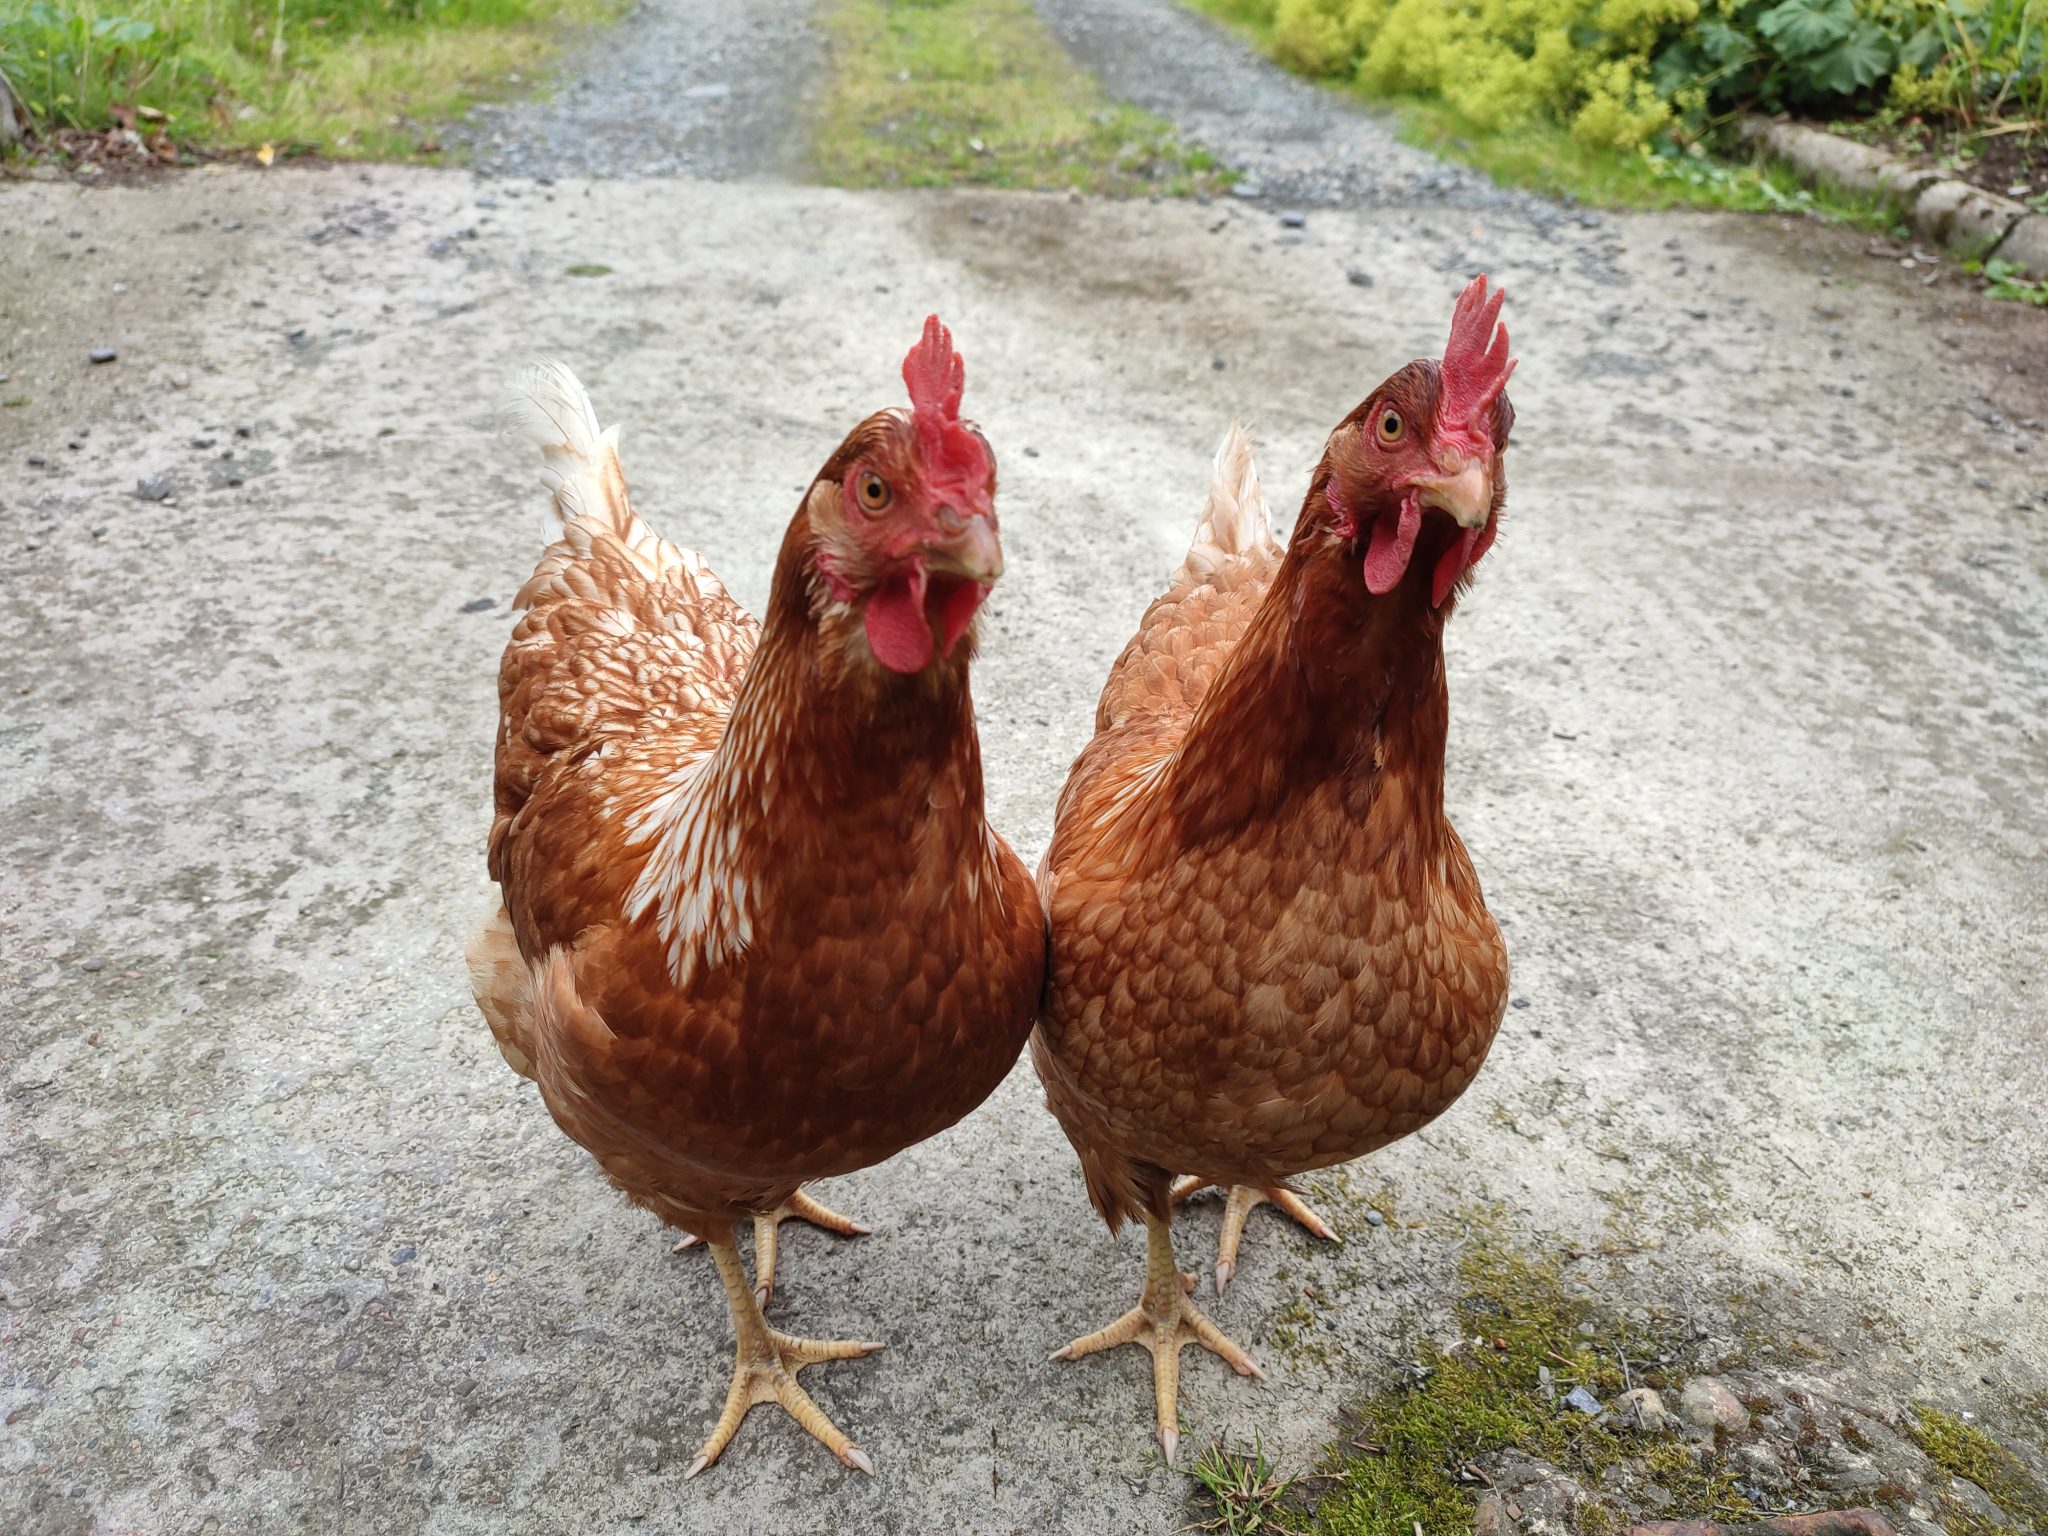 Chickens (roosters, cockerels). Breed is probably Red Star, similar to Rhode Island Red and ISA Brown. Location: Wick, Scotland.